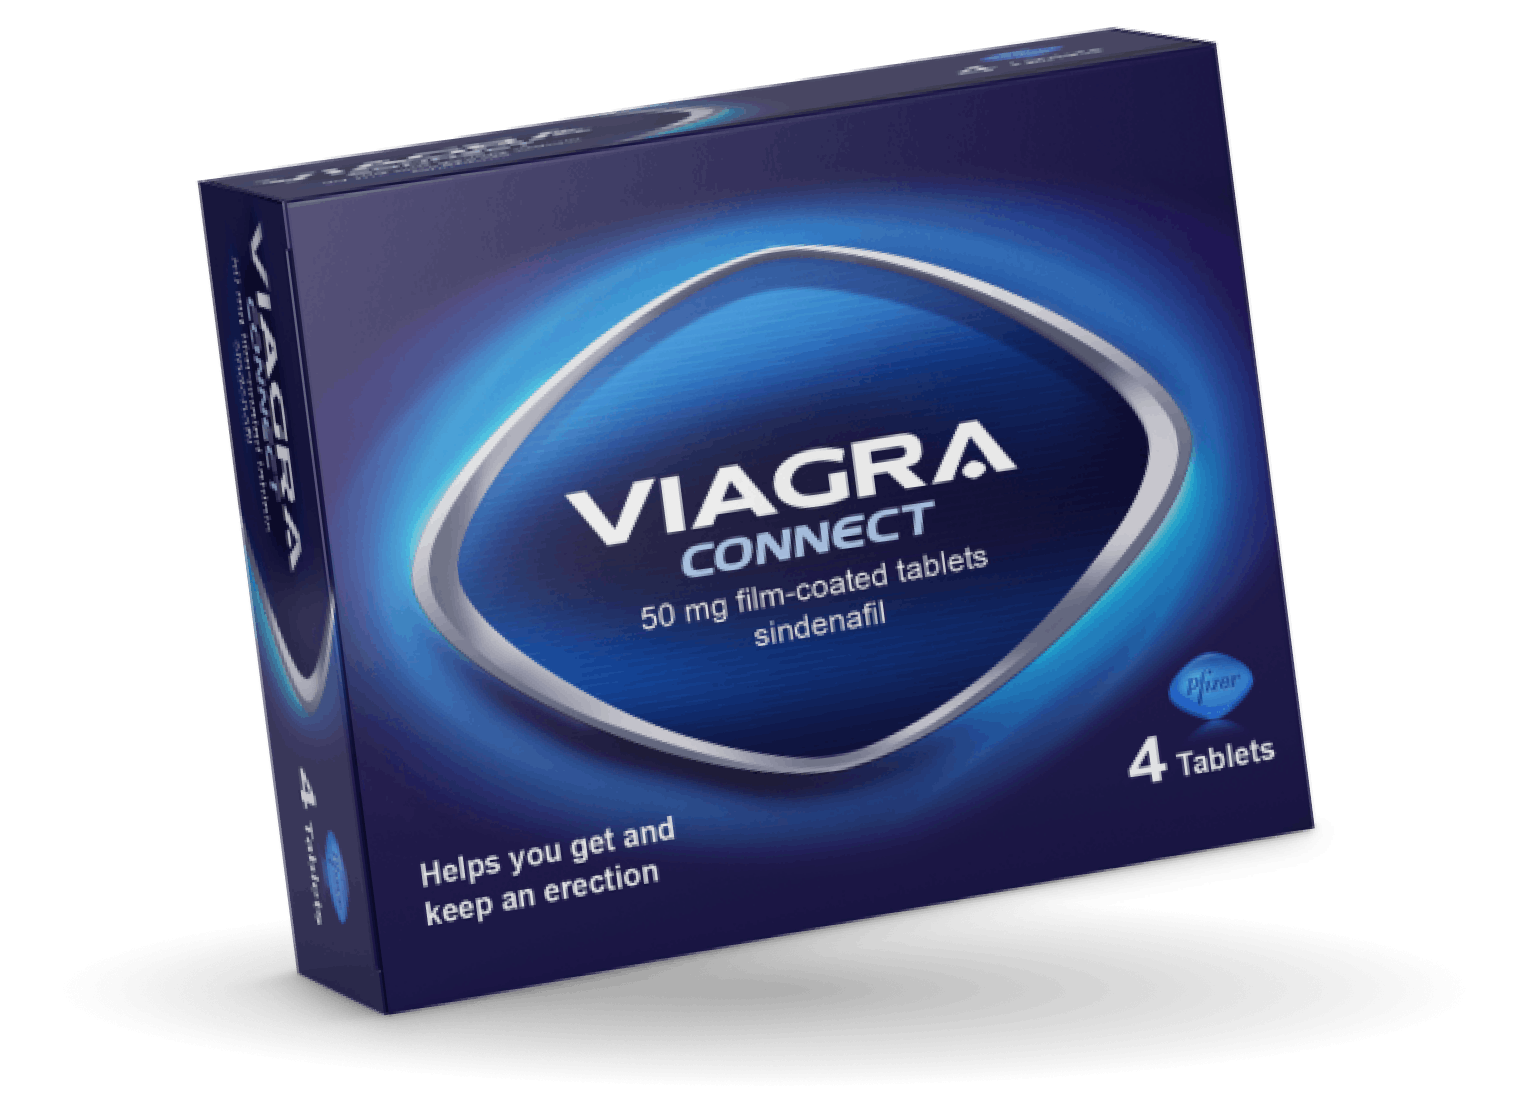 Viagra Connect | Buy Viagra Connect online - Well Pharmacy